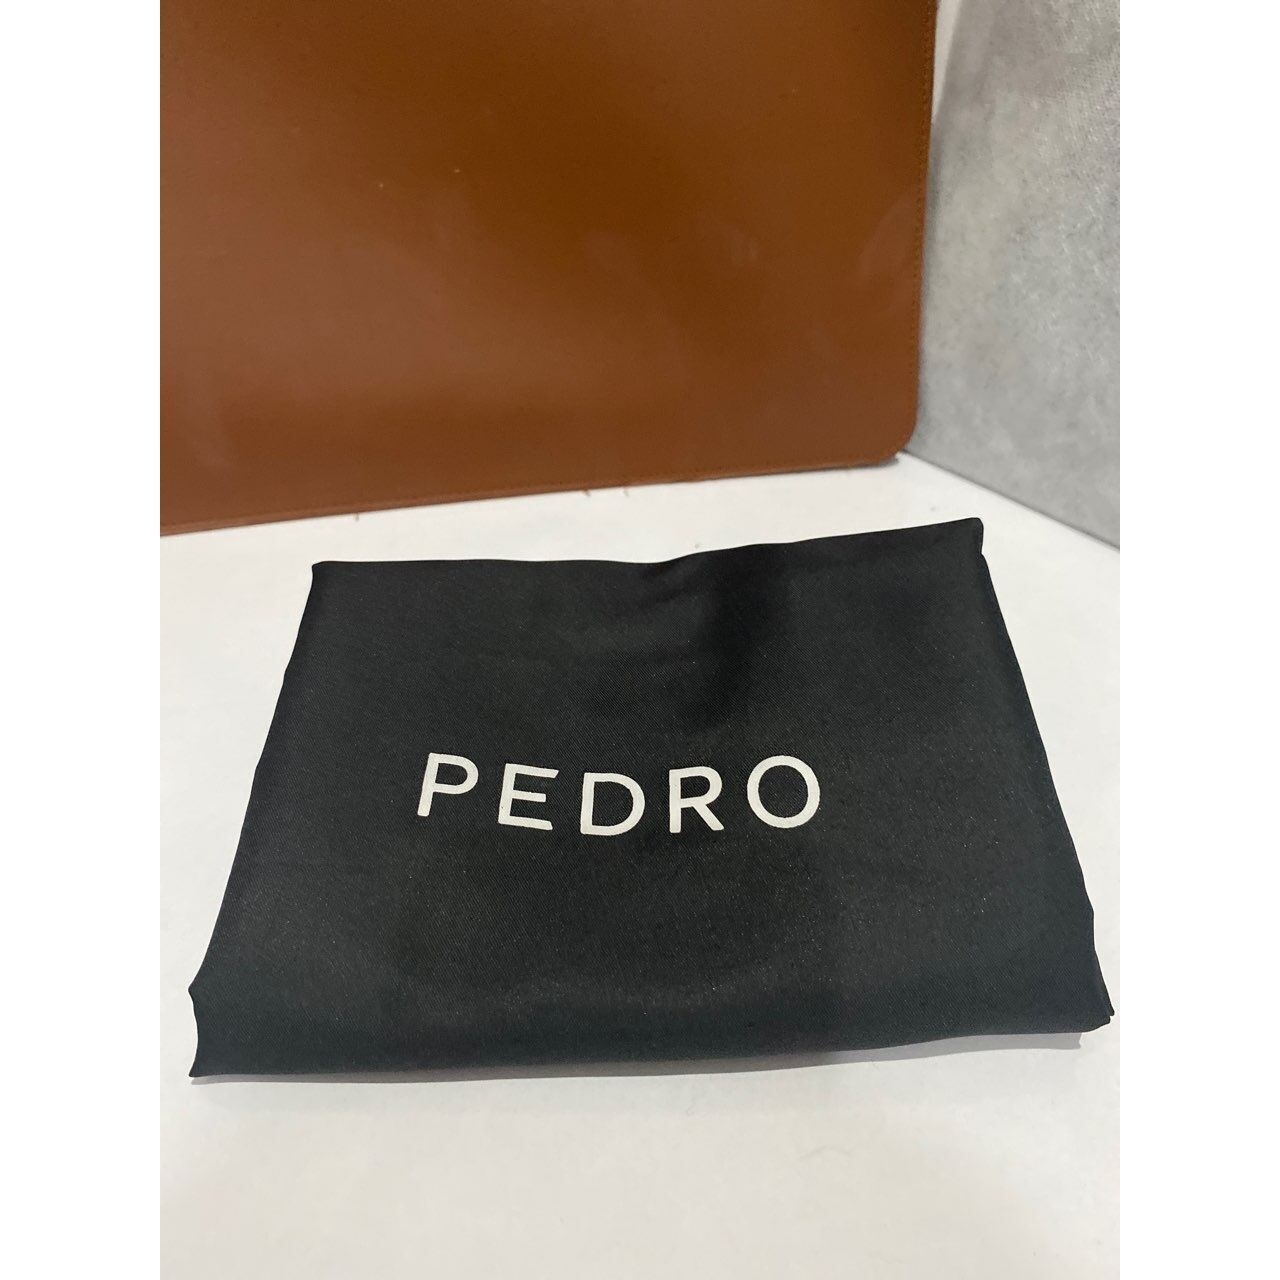 Pedro Women's Large Capacity Pleated Shoulder Tote Bag